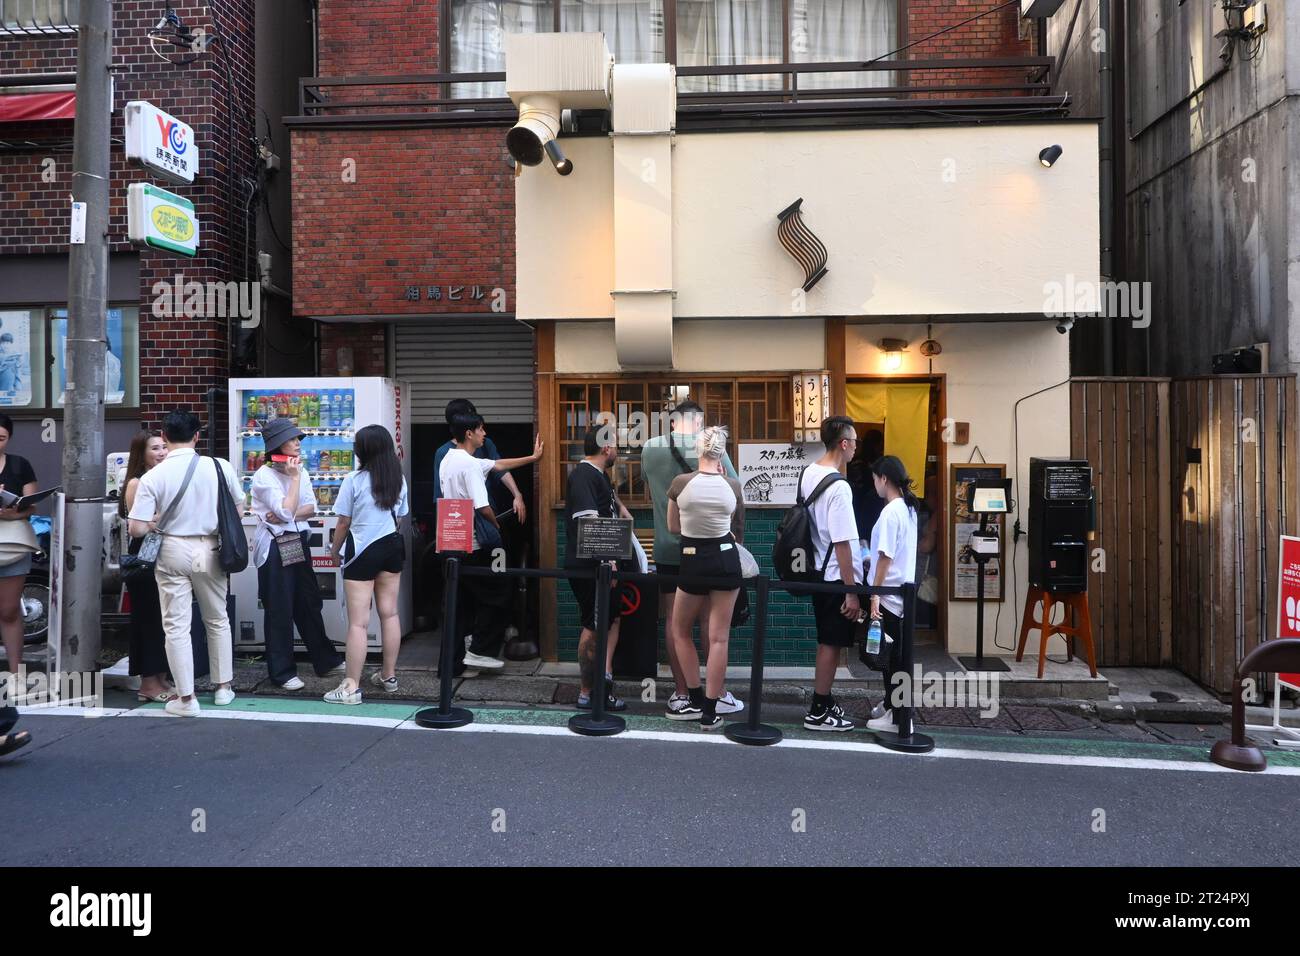 Queueing for a restaurant in Tokyo. People waiting in line outside of Udon Shin Restaurant to eat Udon noodles, famous in the Tokyo culinary scene Stock Photo